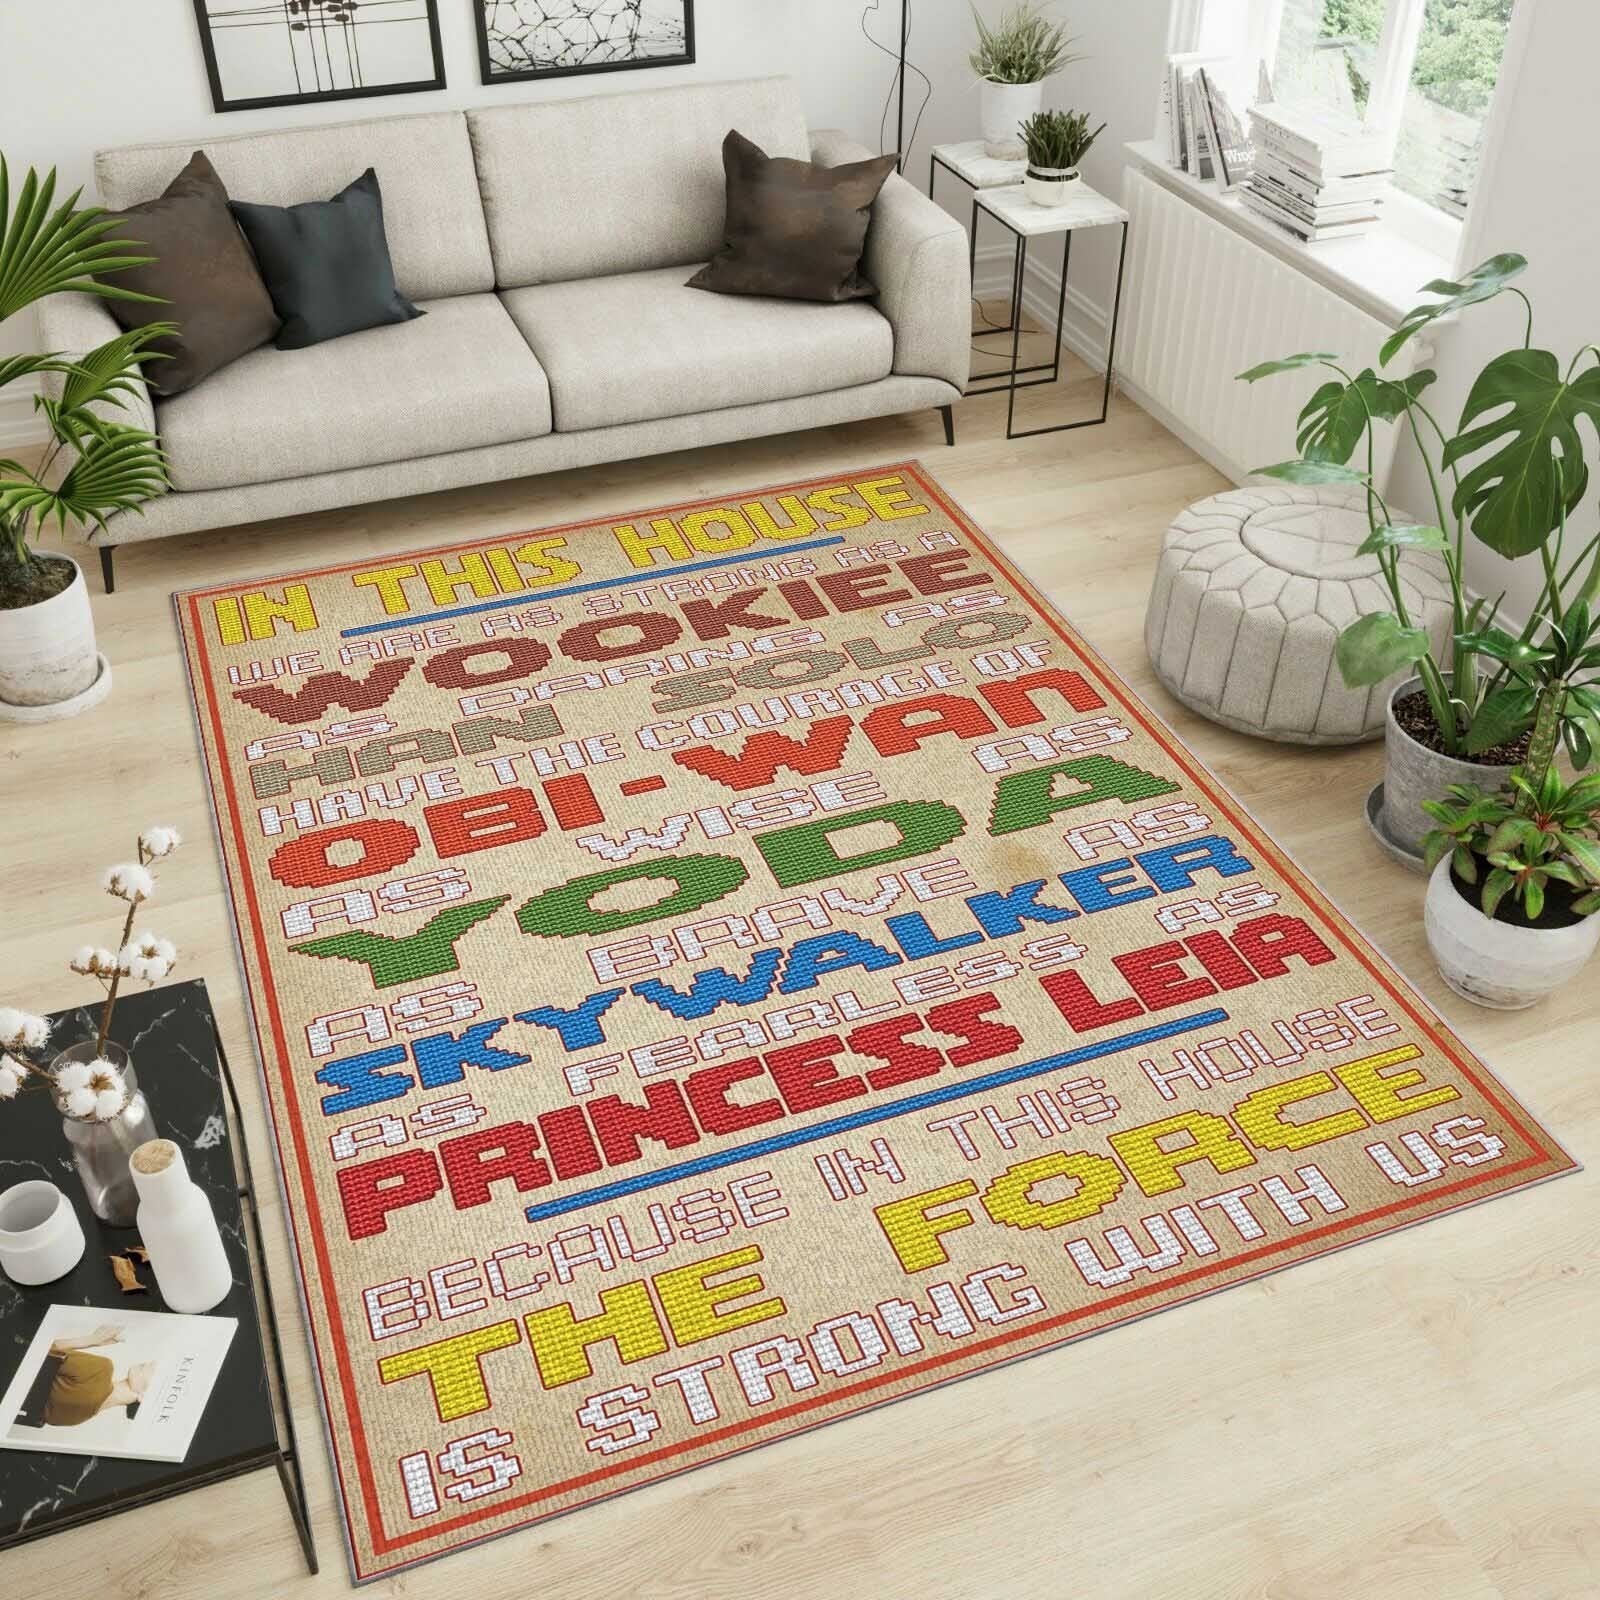 Star Wars In This House The Force Is Strong With Us Area Rug Home Decor Bedroom Living Room Decor